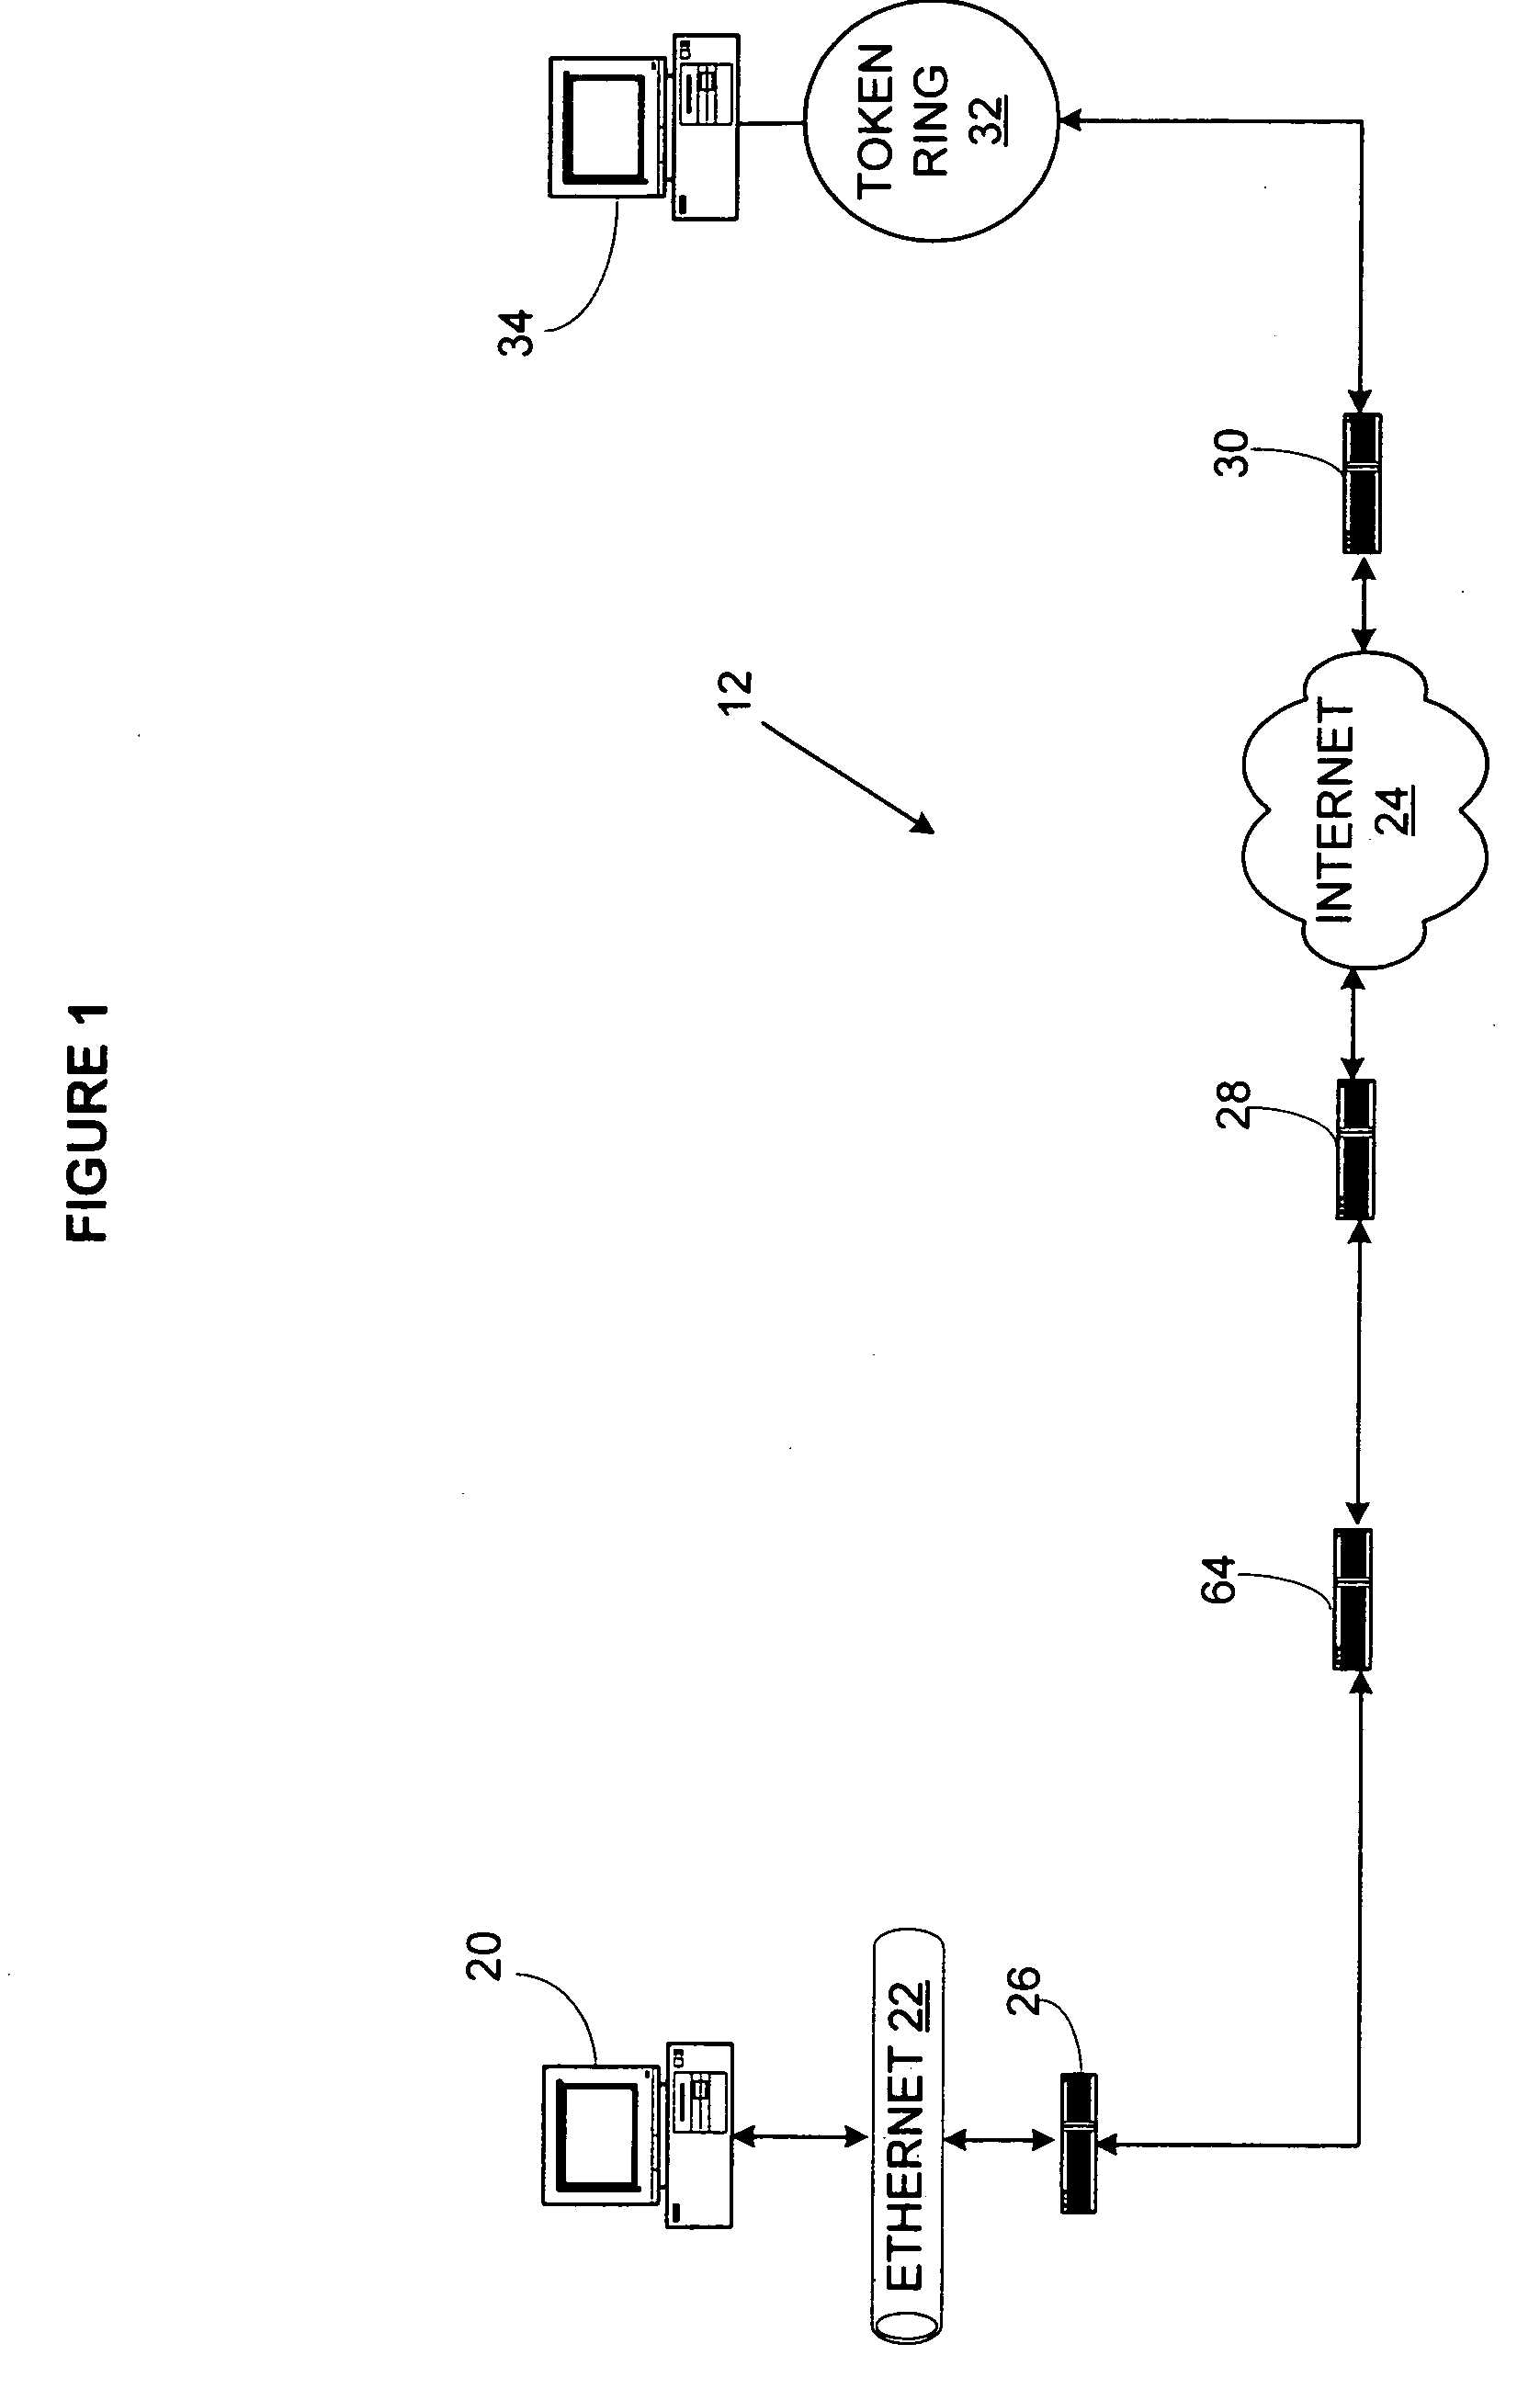 Methods and device for managing message size transmitted over a network